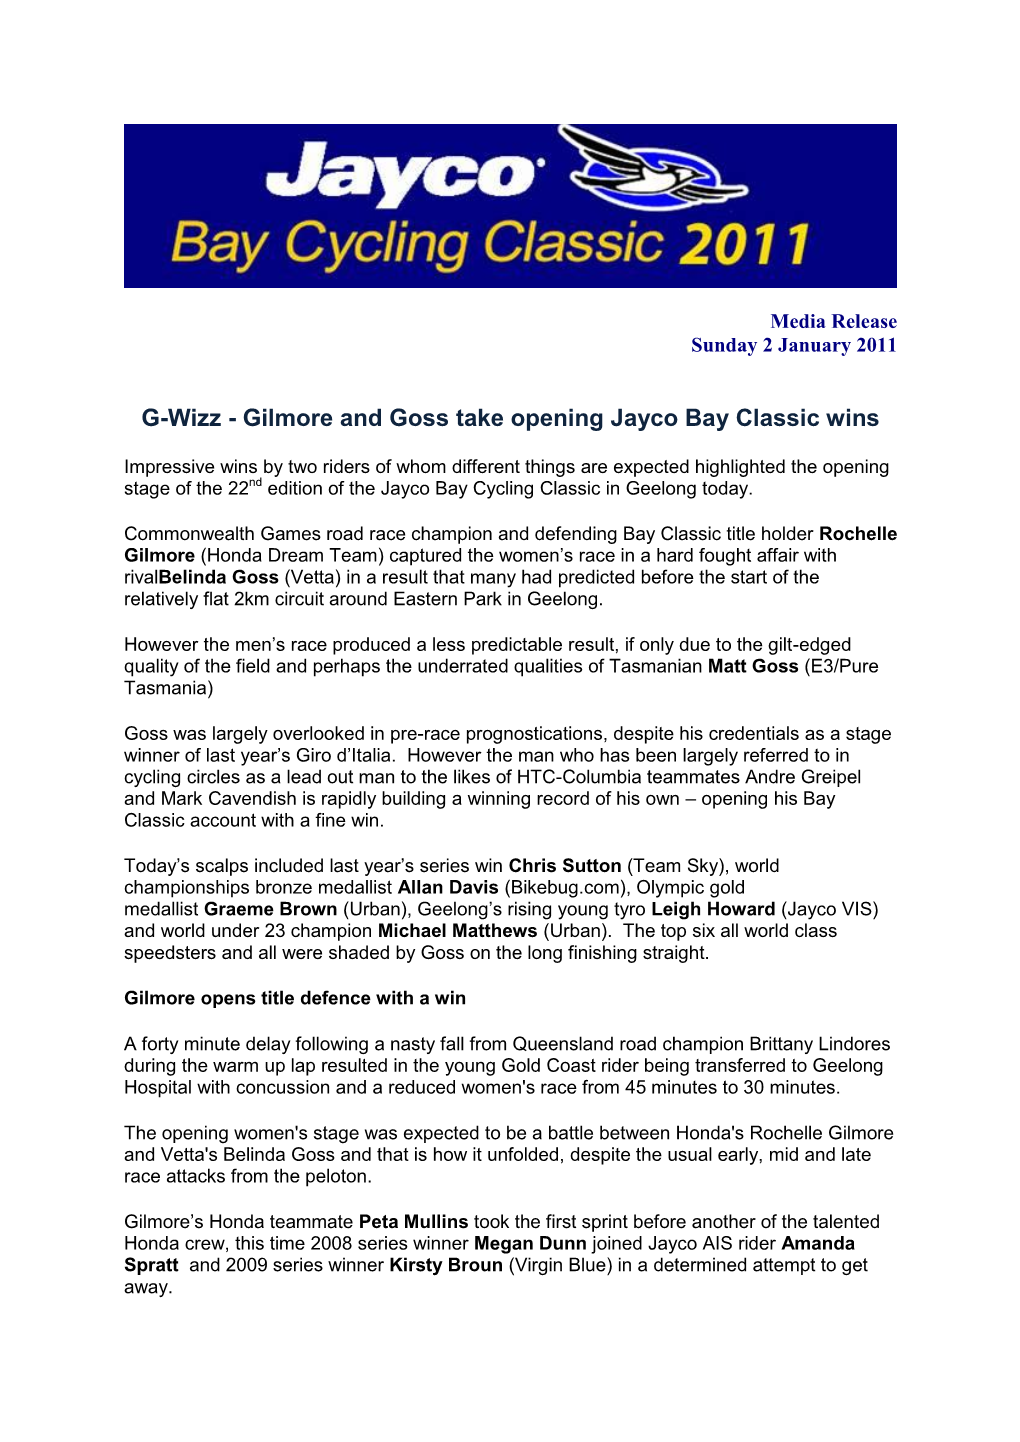 G-Wizz - Gilmore and Goss Take Opening Jayco Bay Classic Wins